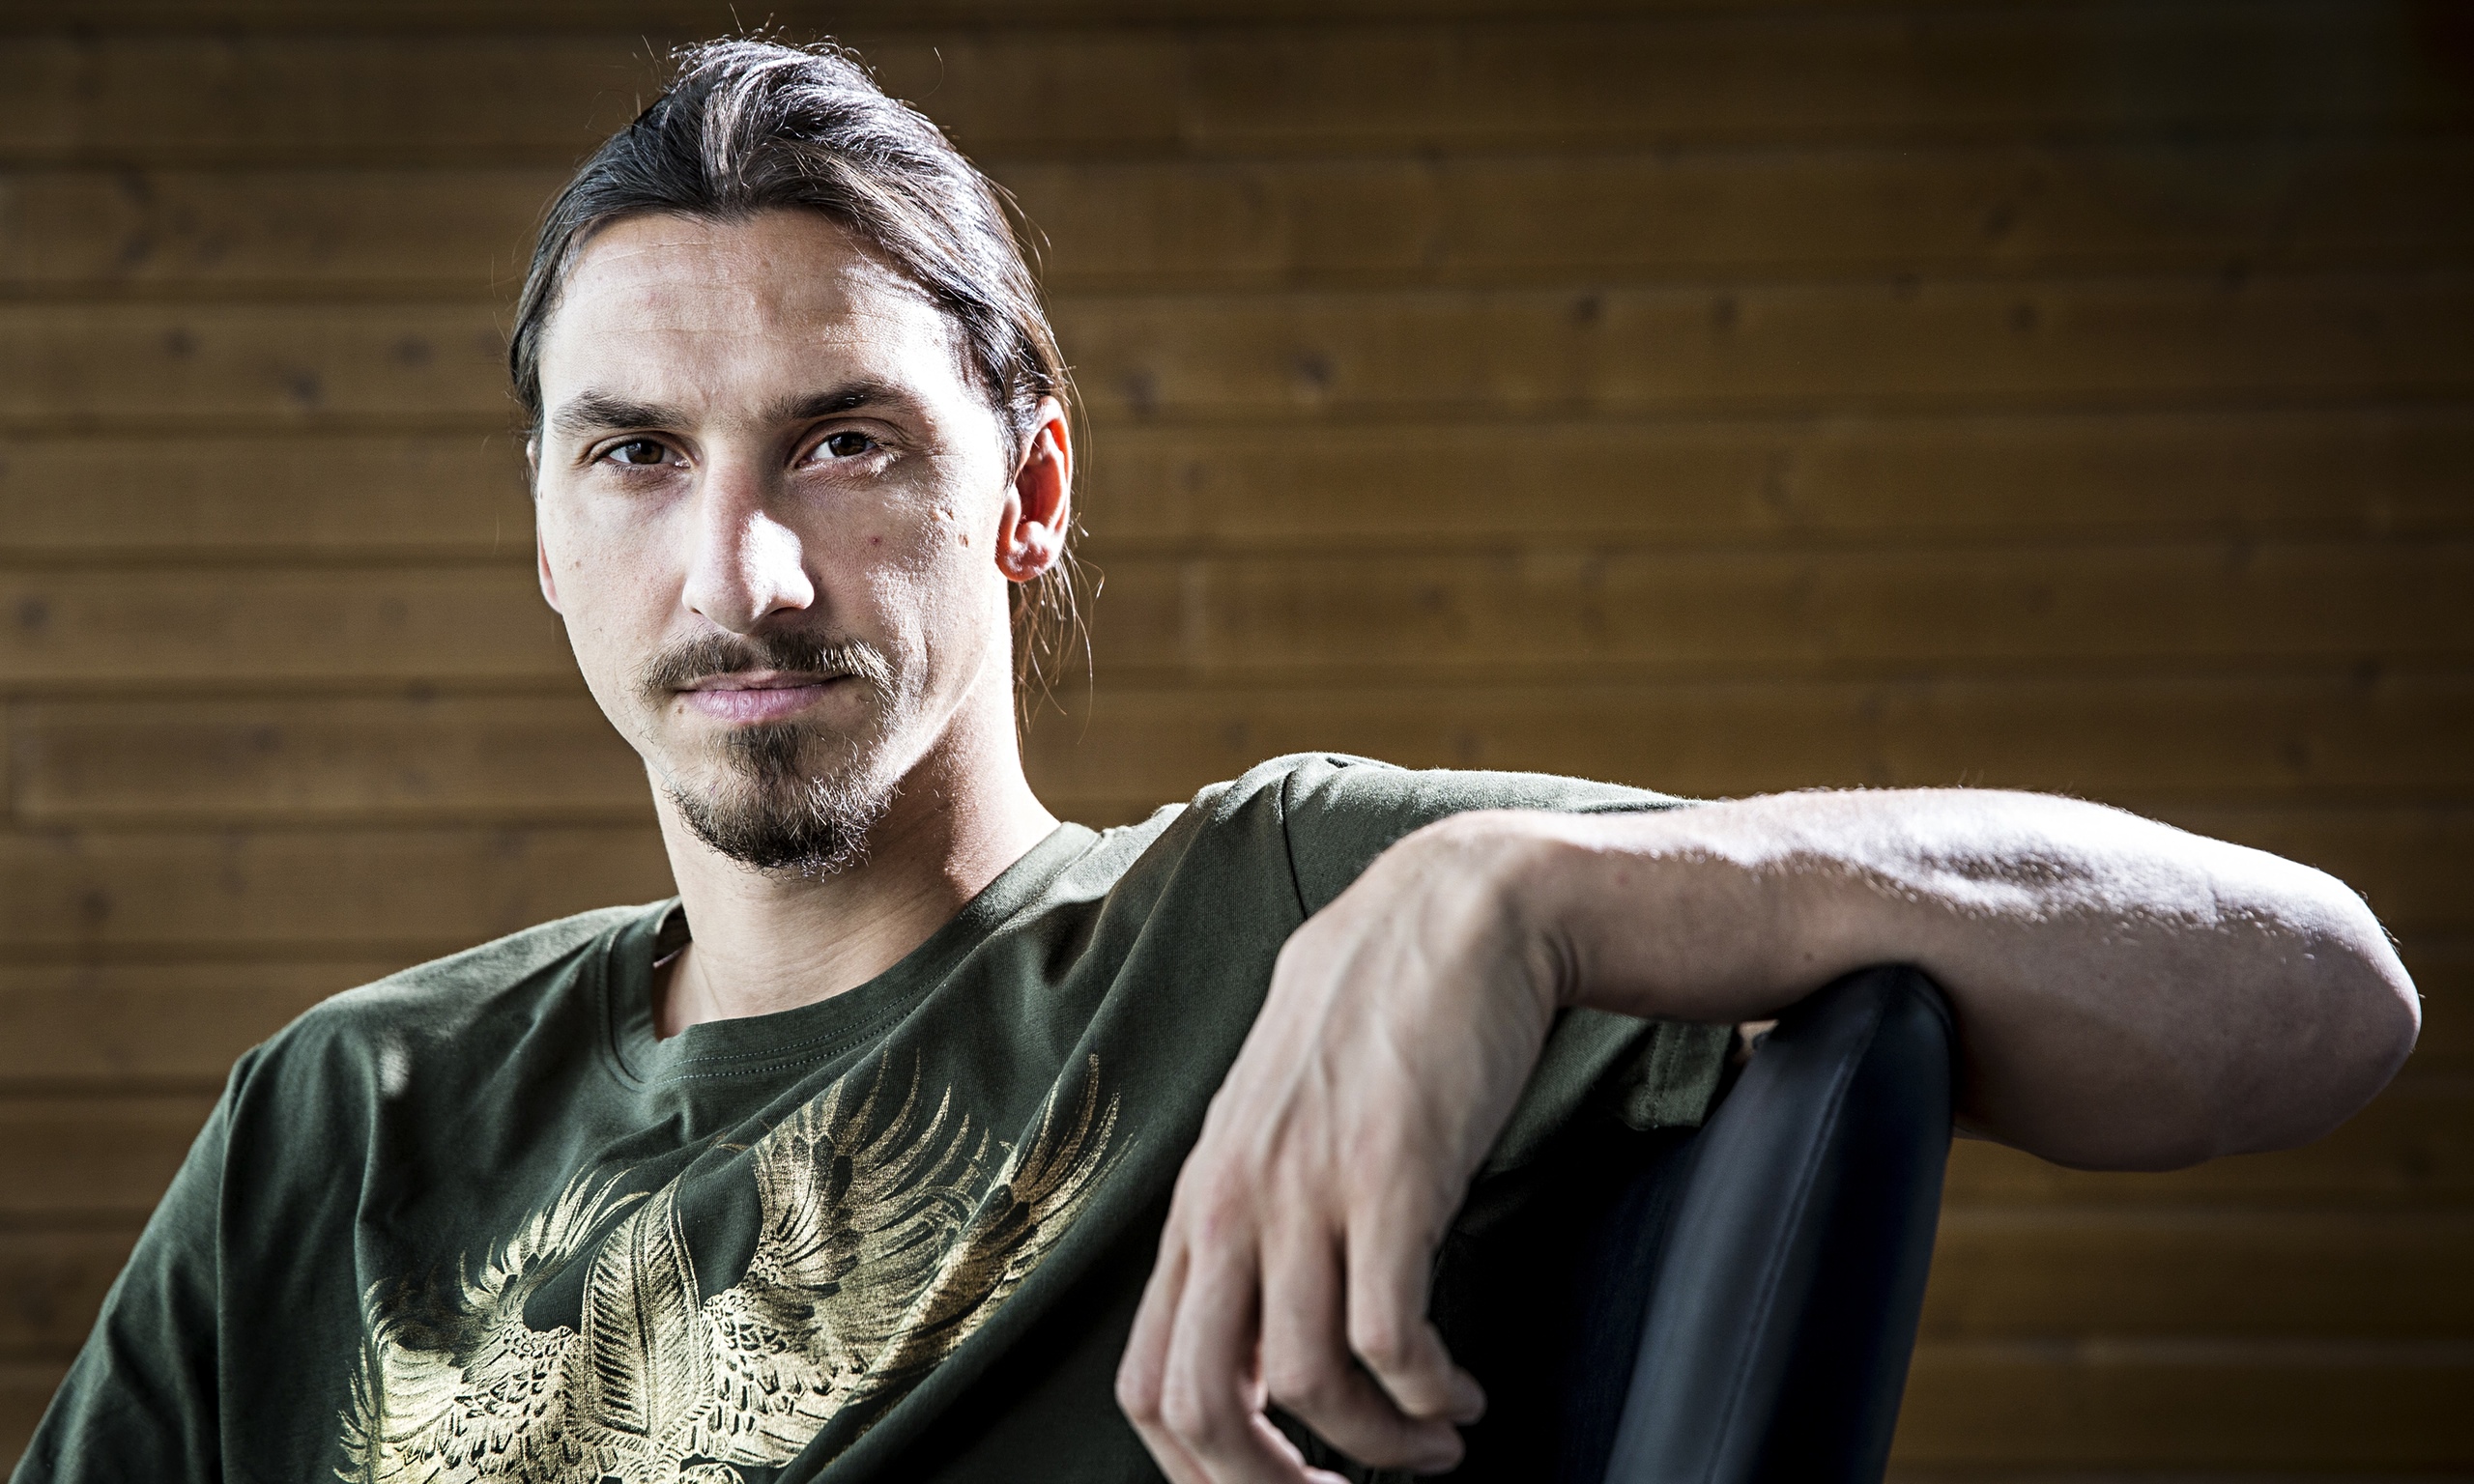 http://static.guim.co.uk/sys-images/Guardian/Pix/pictures/2014/10/6/1412551413618/Zlatan-Ibrahimovic-014.jpg